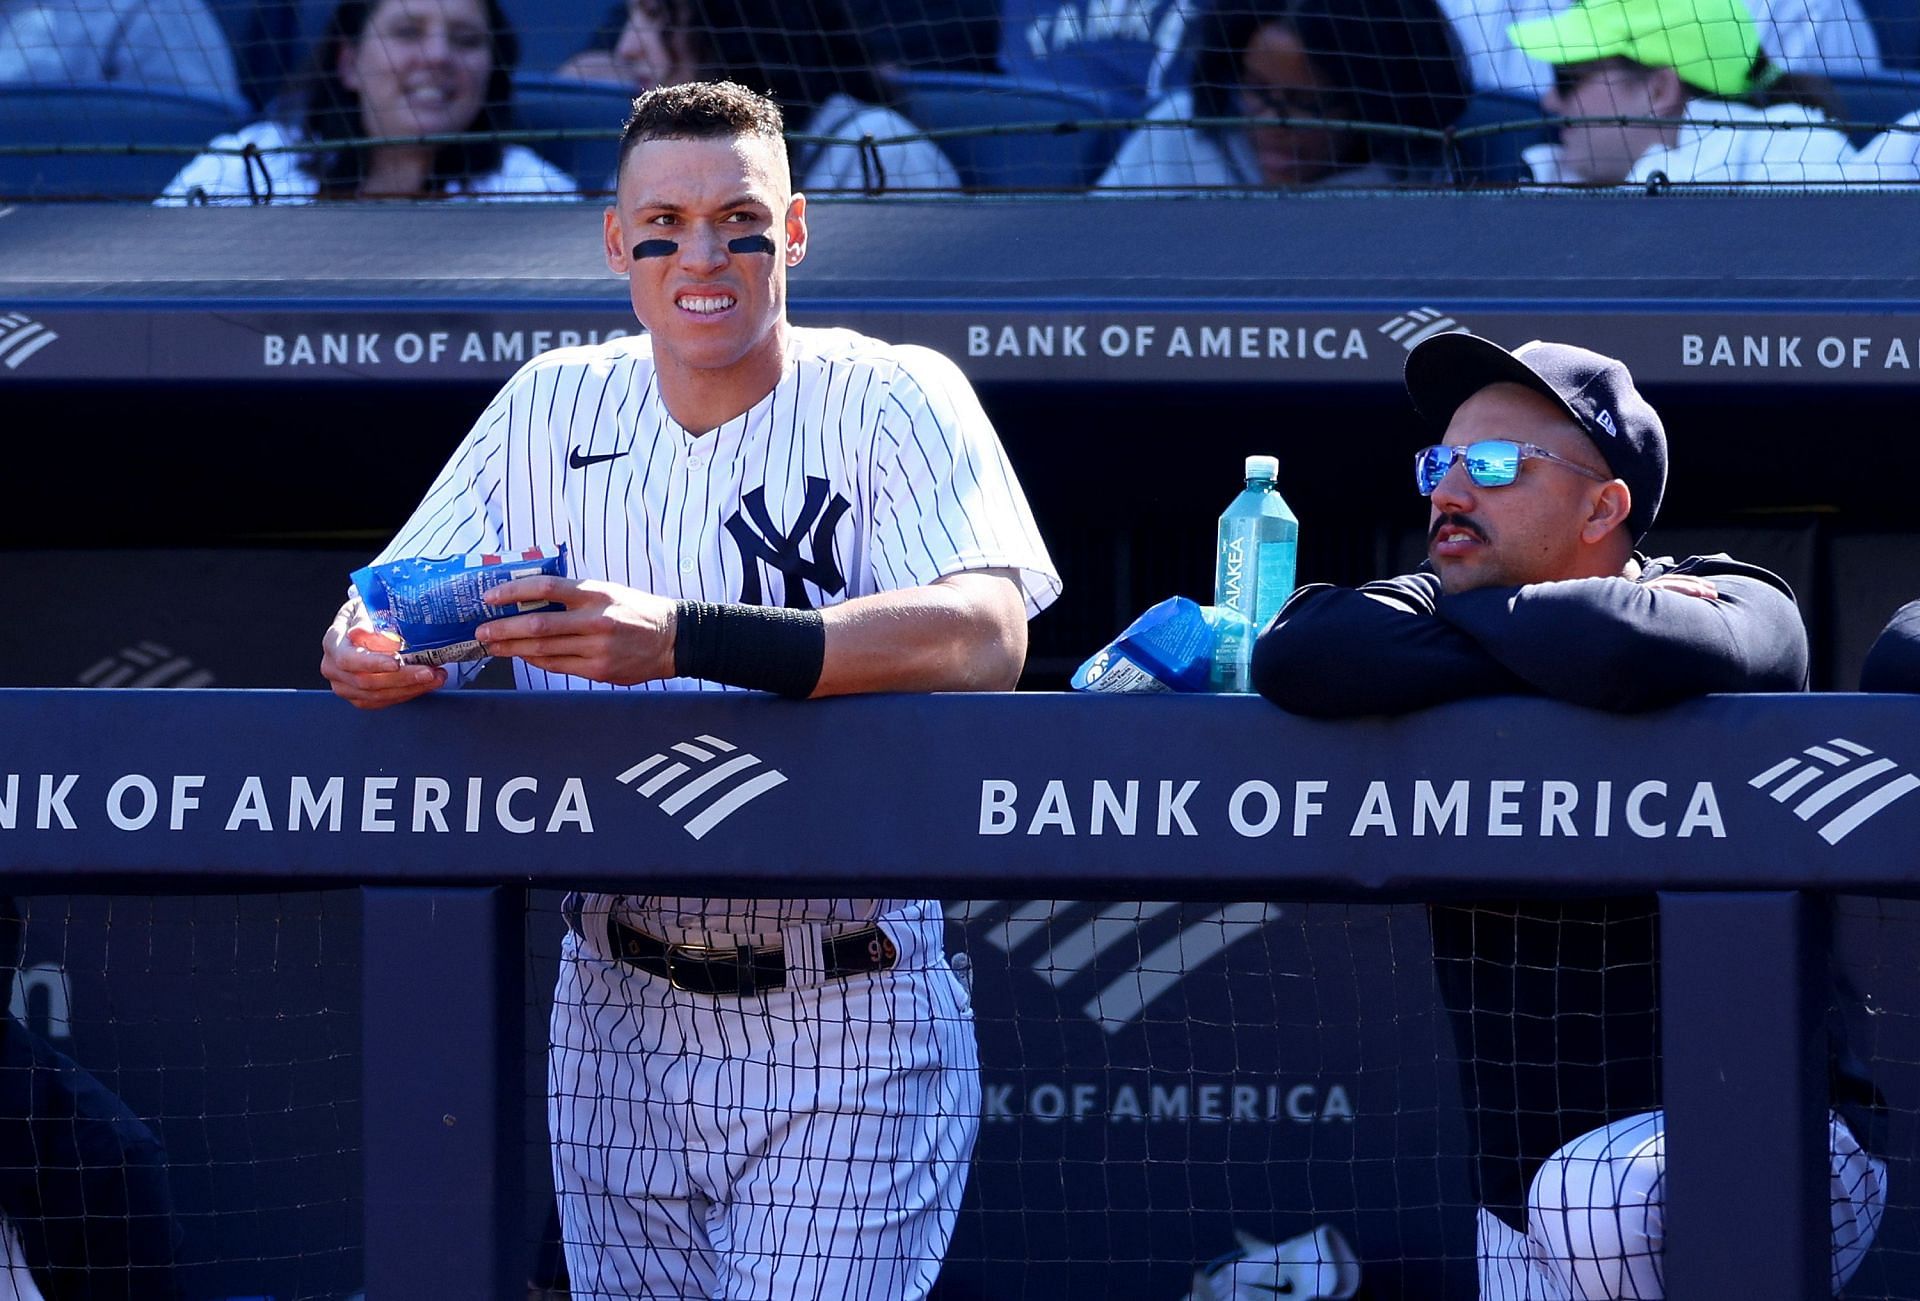 We won't leave the clubhouse until Aaron leaves that's our guy - New  York Yankees pitcher Nestor Cortes opens up about Aaron Judge's leadership  and locker room chemistry